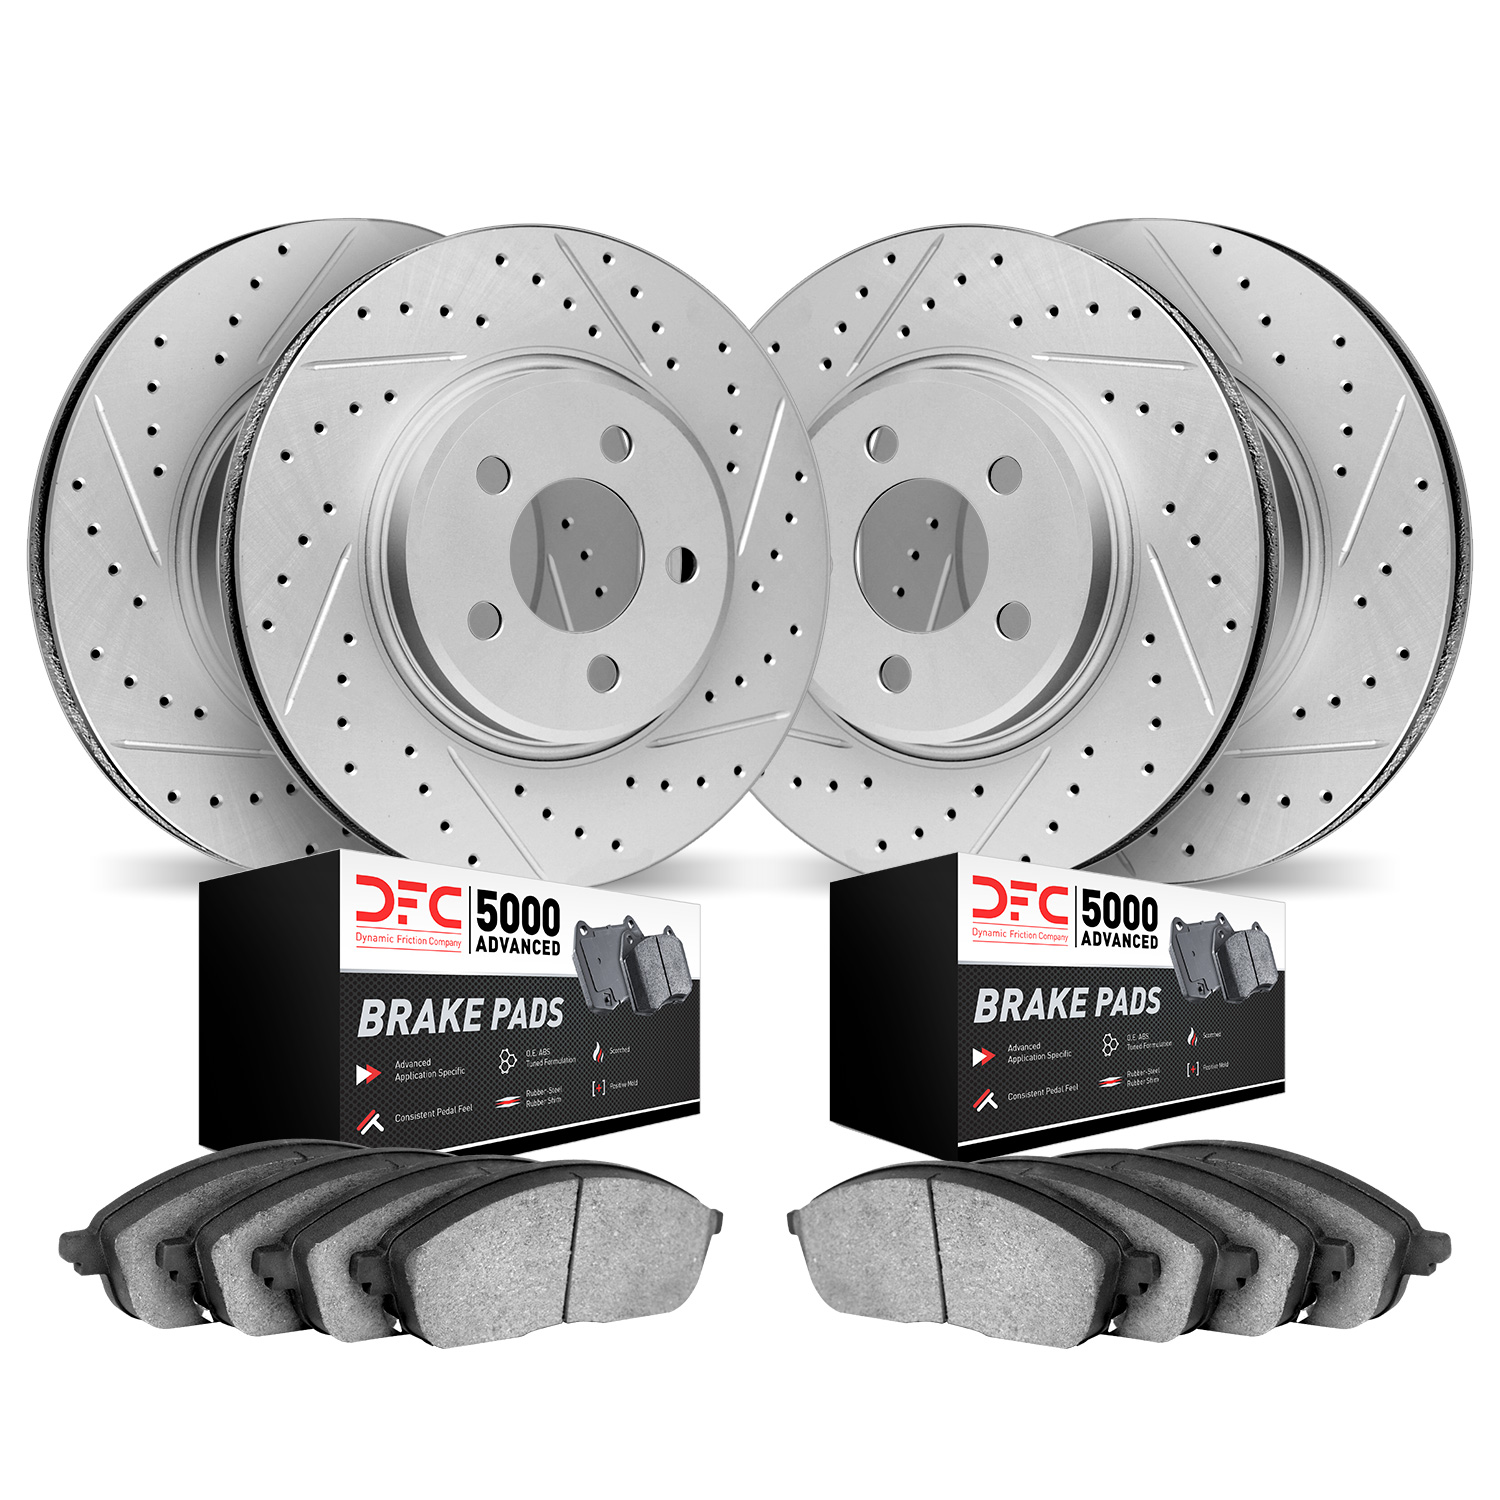 2504-46021 Geoperformance Drilled/Slotted Rotors w/5000 Advanced Brake Pads Kit, 2014-2019 GM, Position: Front and Rear